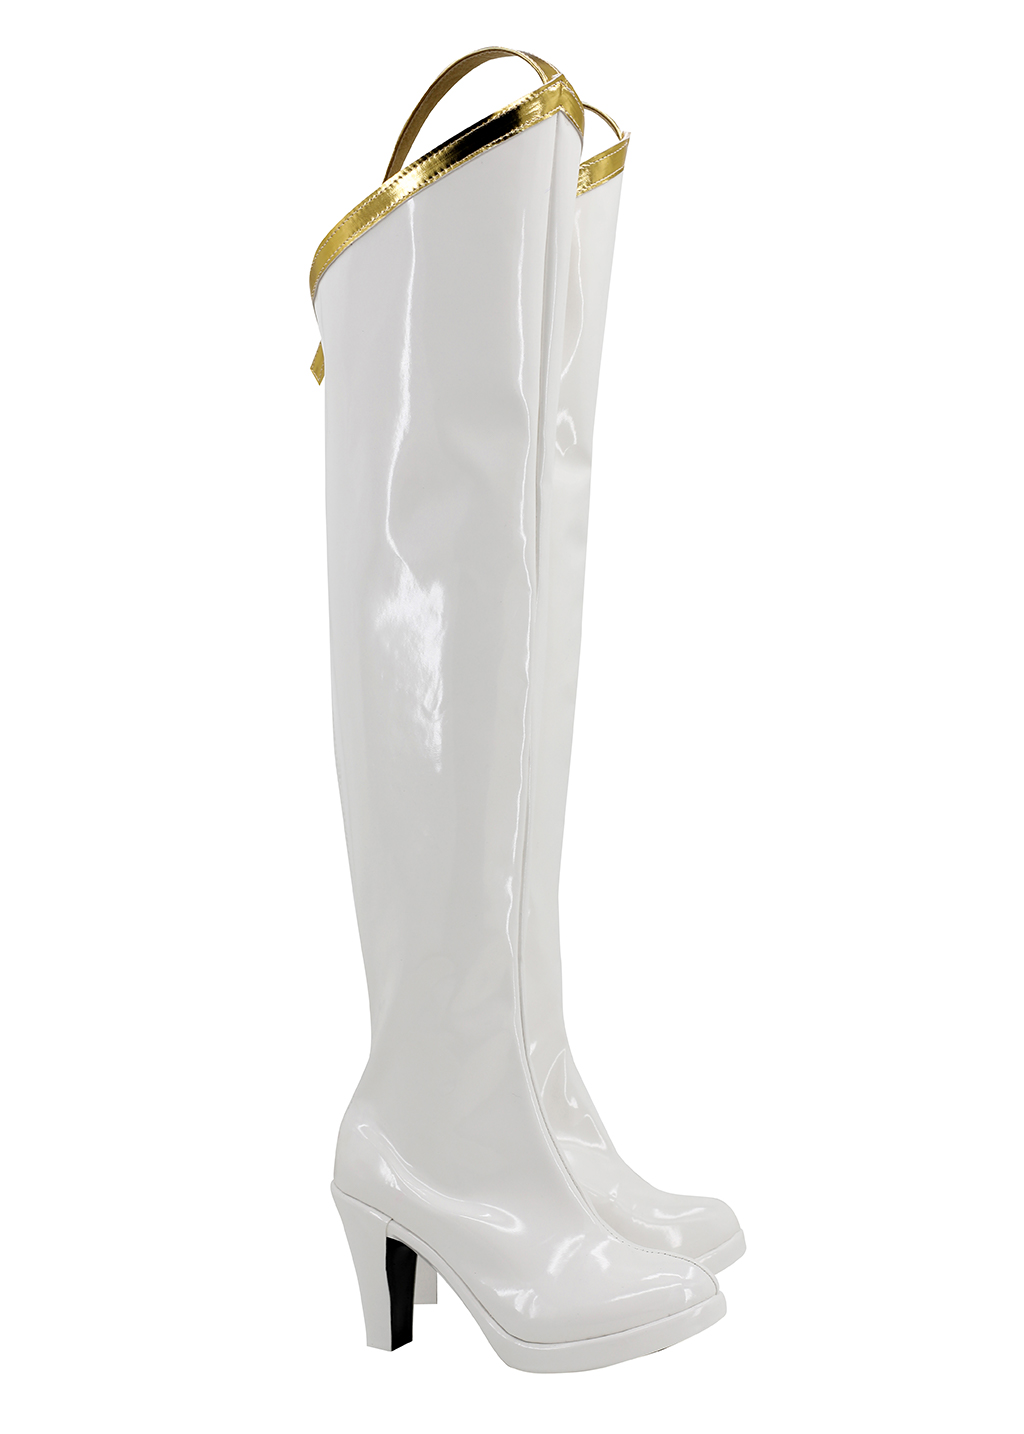 Code Geass: Lelouch of the Rebellion Shoes Men C.C. Boots Cosplay